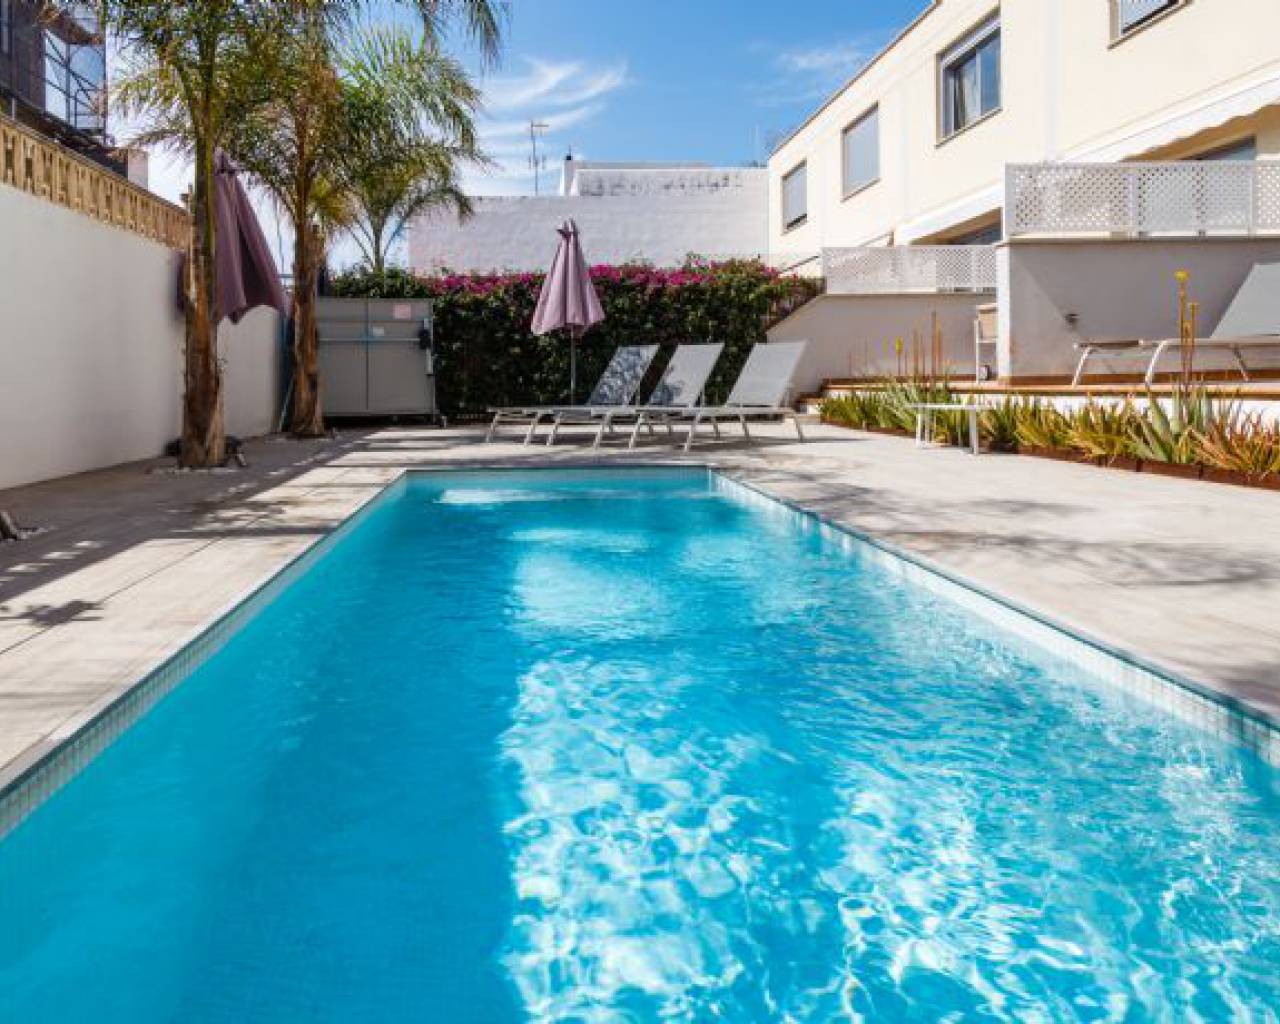 Apartment with a swimming pool for rent in palma-Mallorca rental agents